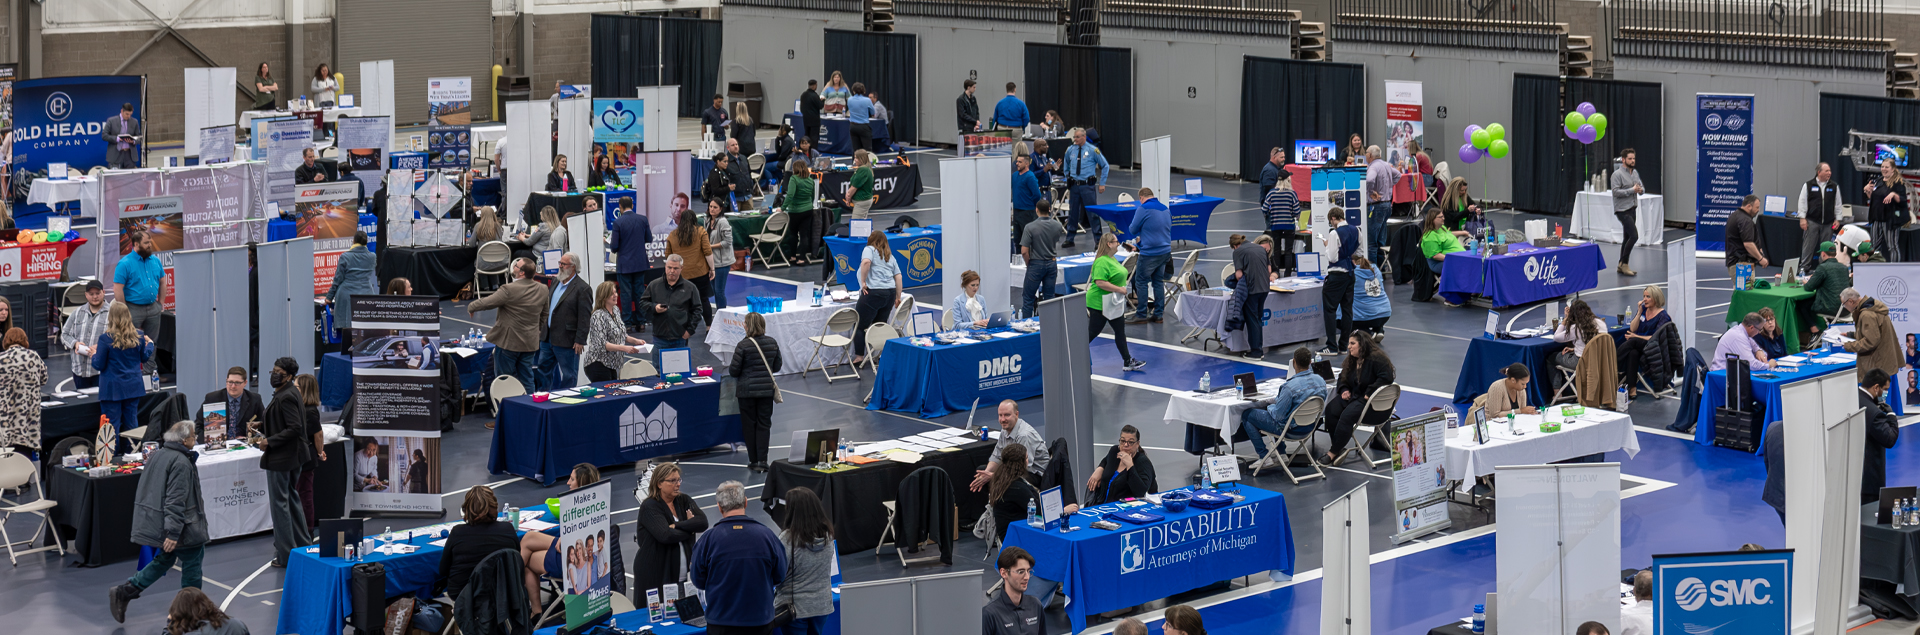 More than 200 employers drew job seekers to the 2023 job fair.